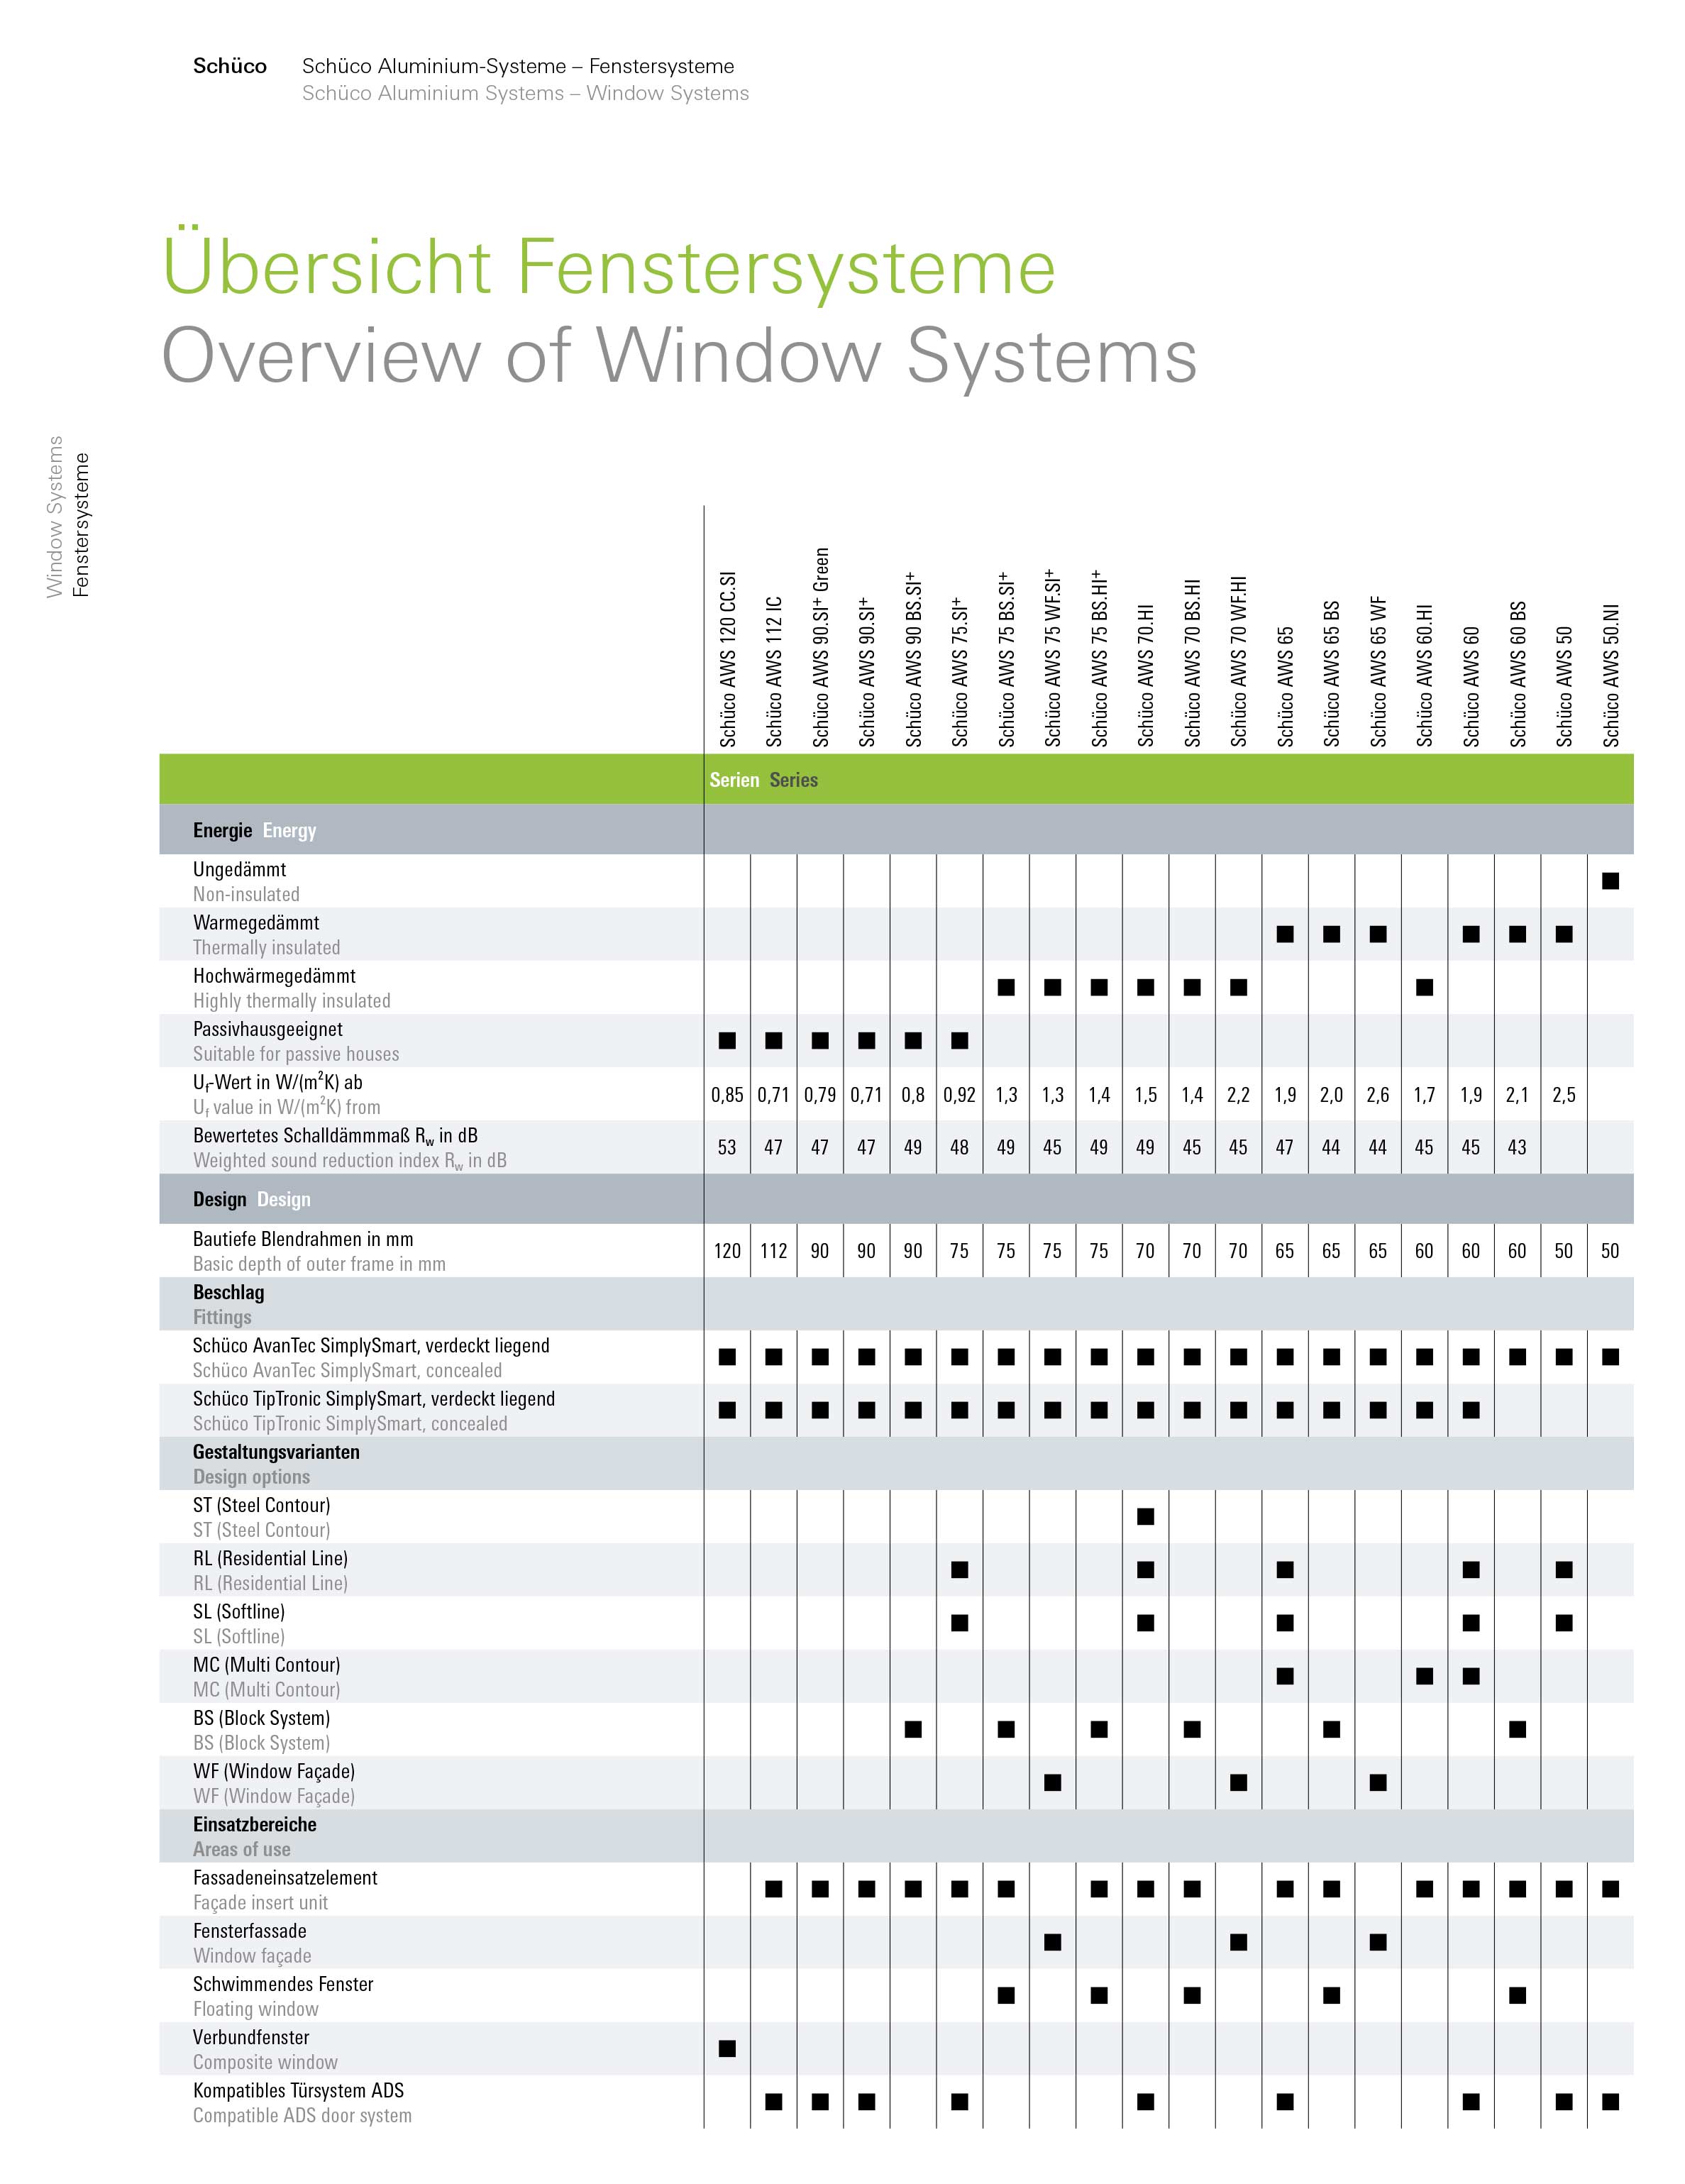 Overview-of-Window-Systems